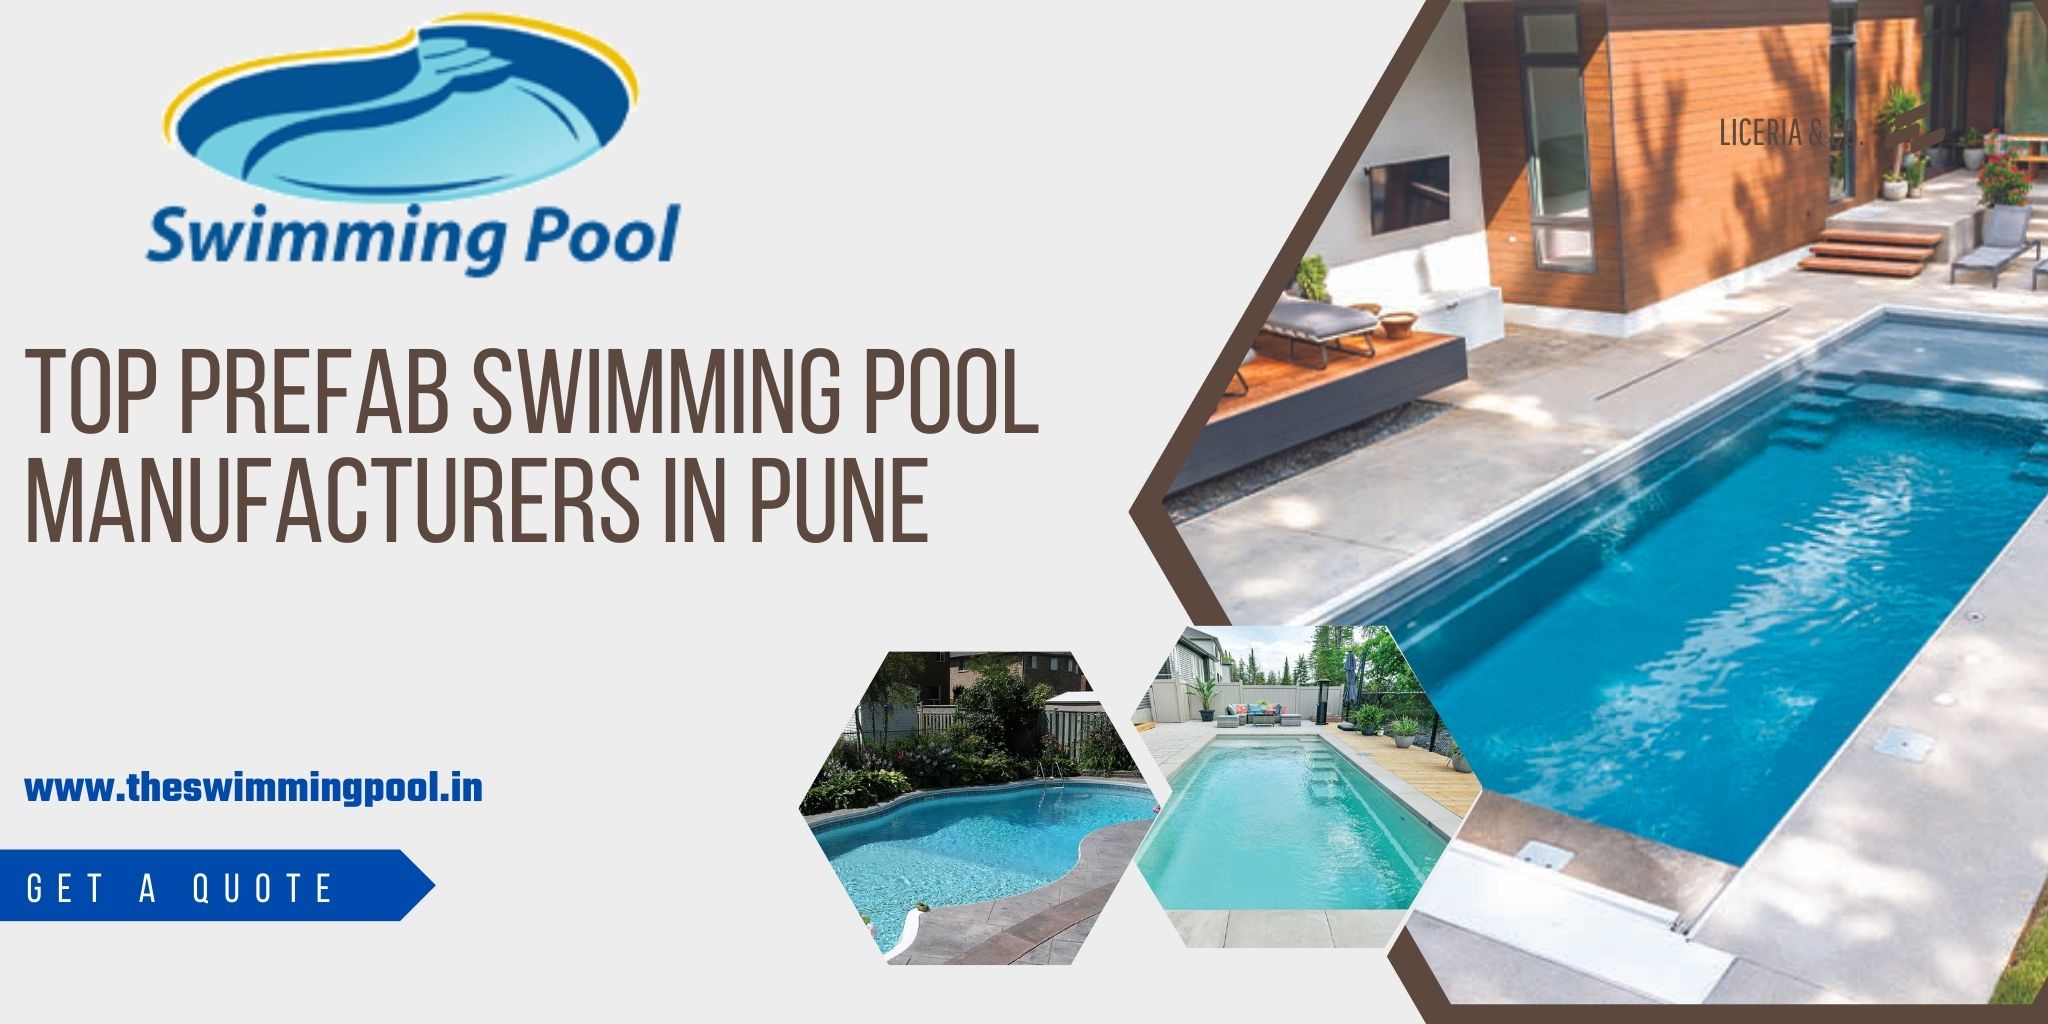 Prefab Swimming Pool Manufacturers in Pune